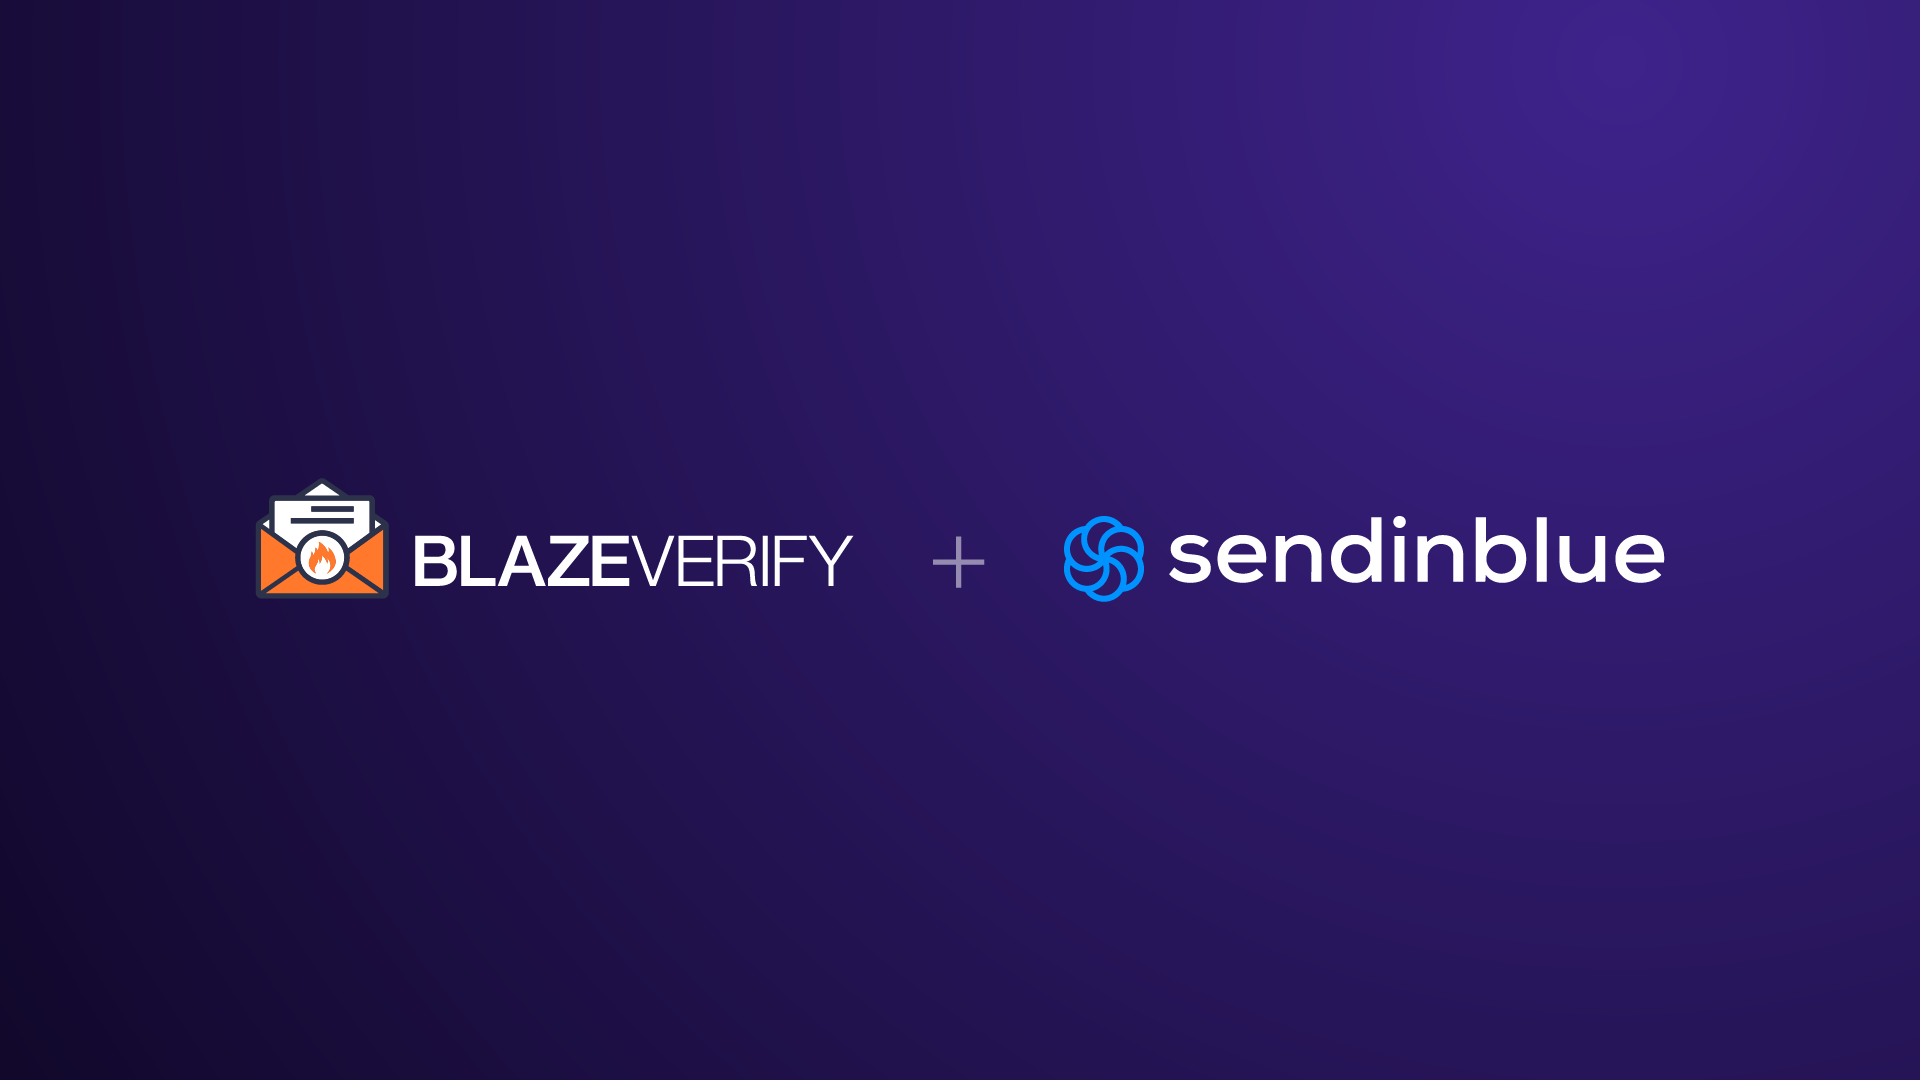 Blaze Verify Partners With Sendinblue to Verify Email Lists and Improve Deliverability